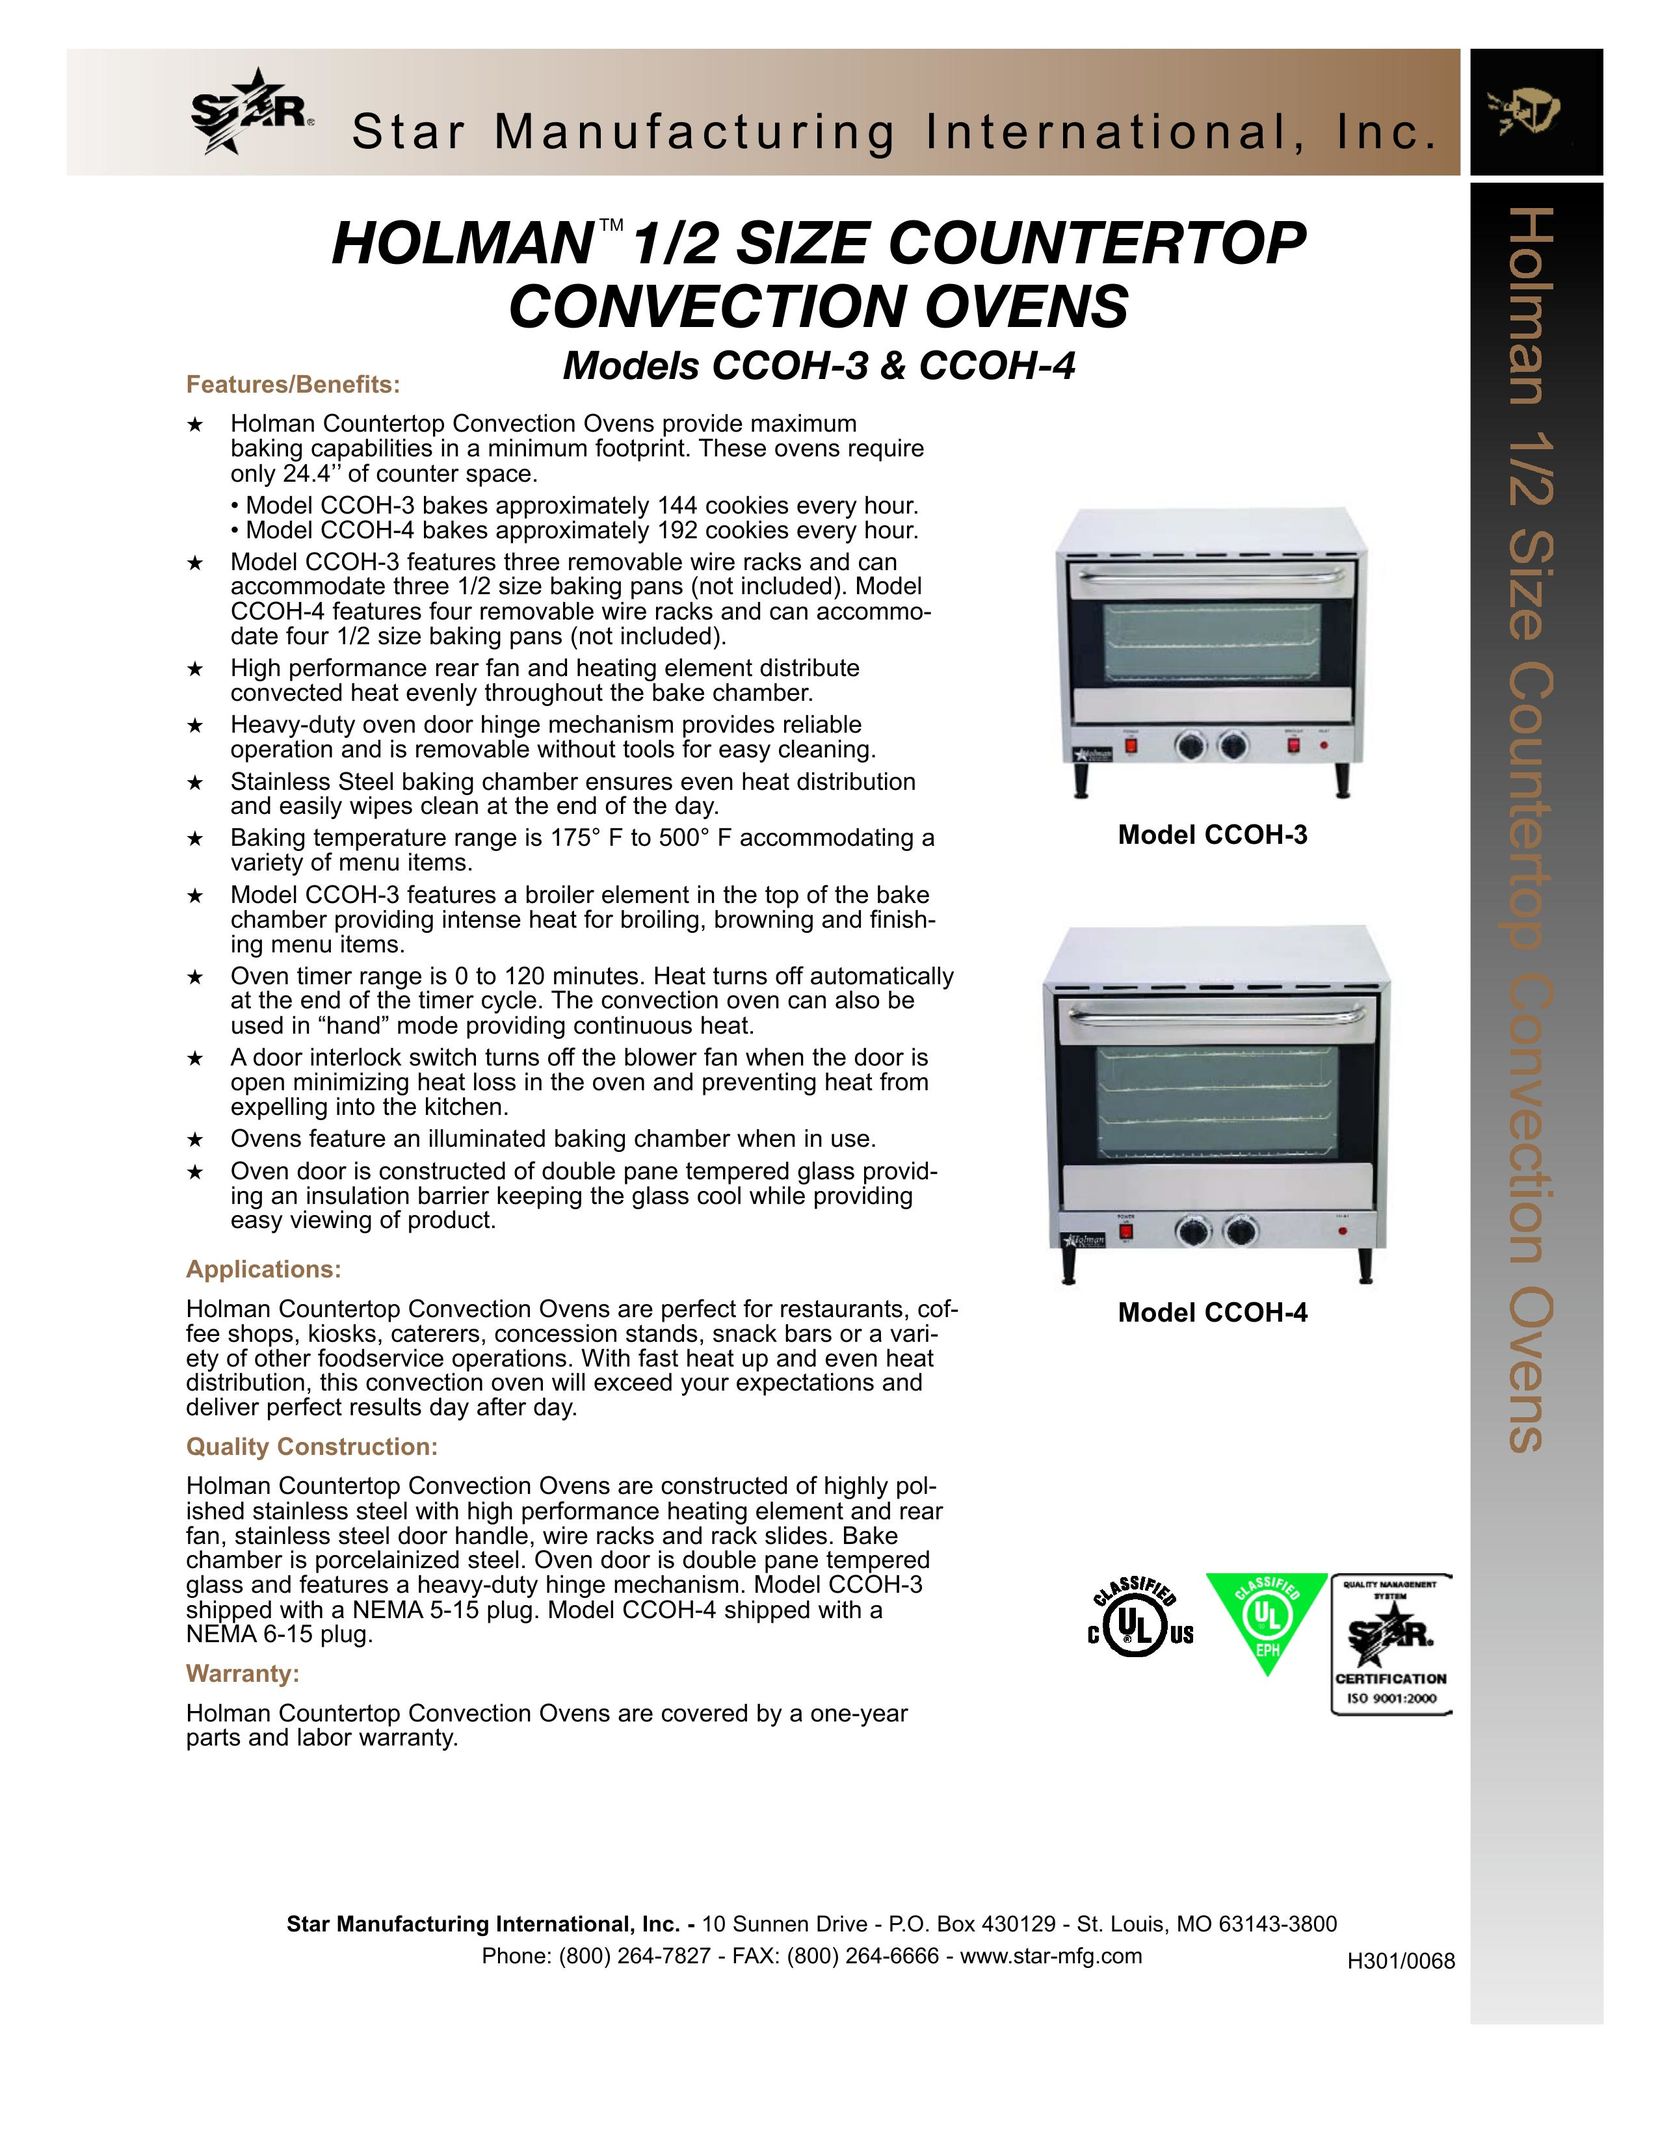 Star Manufacturing CCOH-4 Convection Oven User Manual